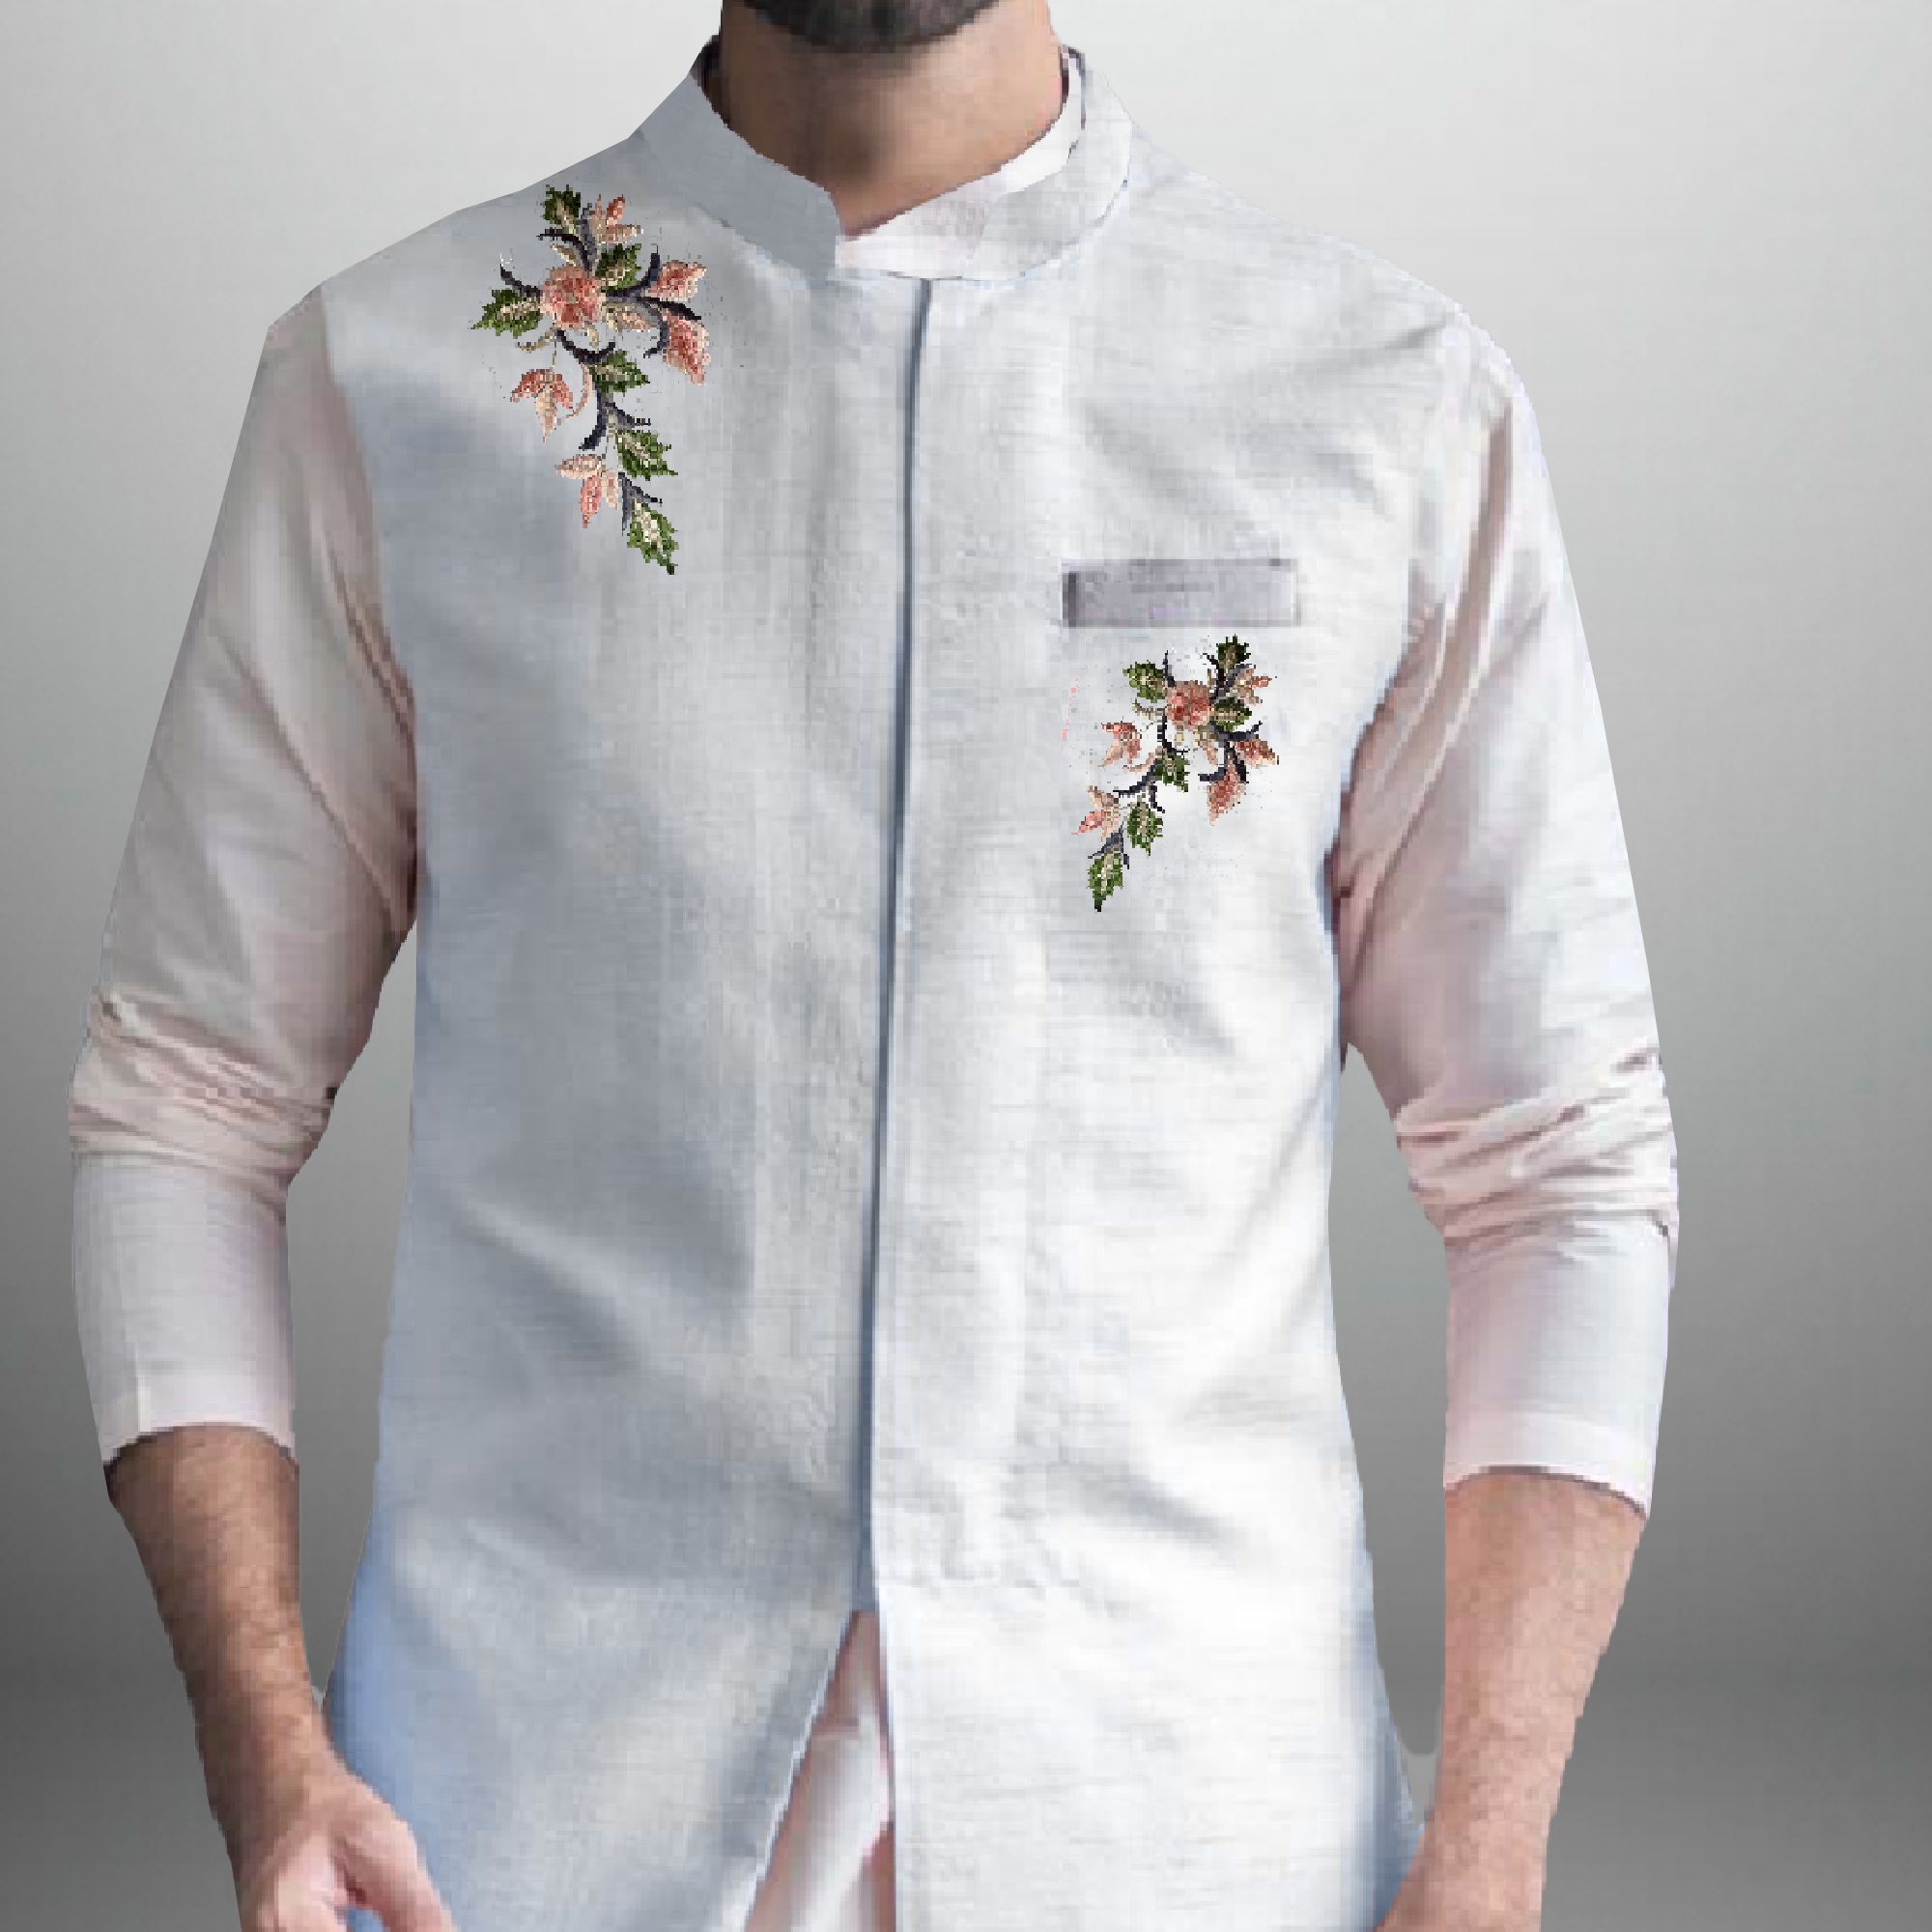 Men's Light Blue waistcoat with floral embroidery on front-RMWC001